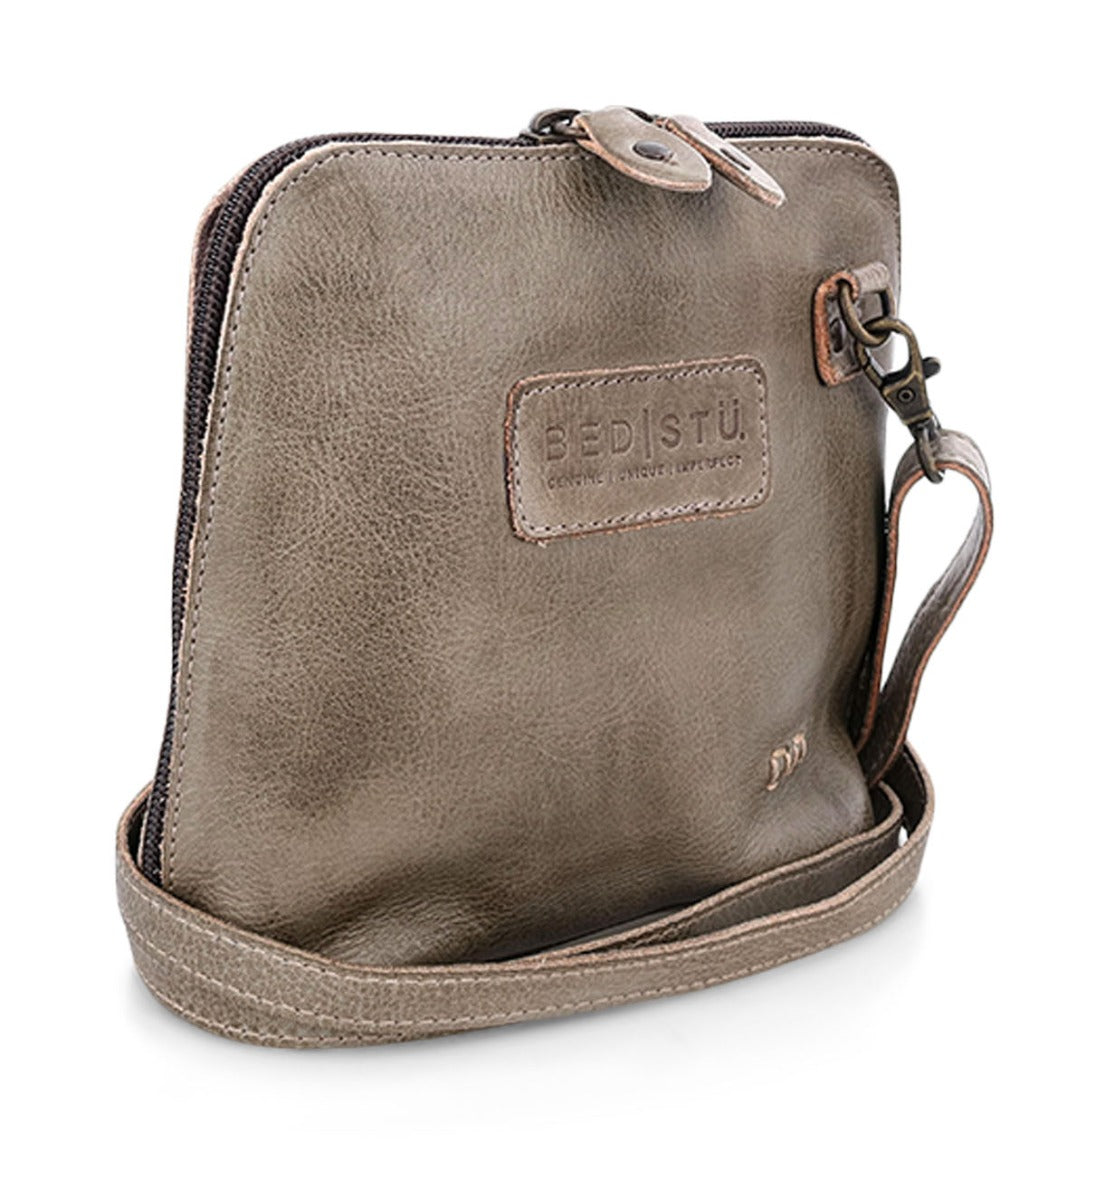 A grey leather Ventura cross body bag with a strap by Bed Stu.